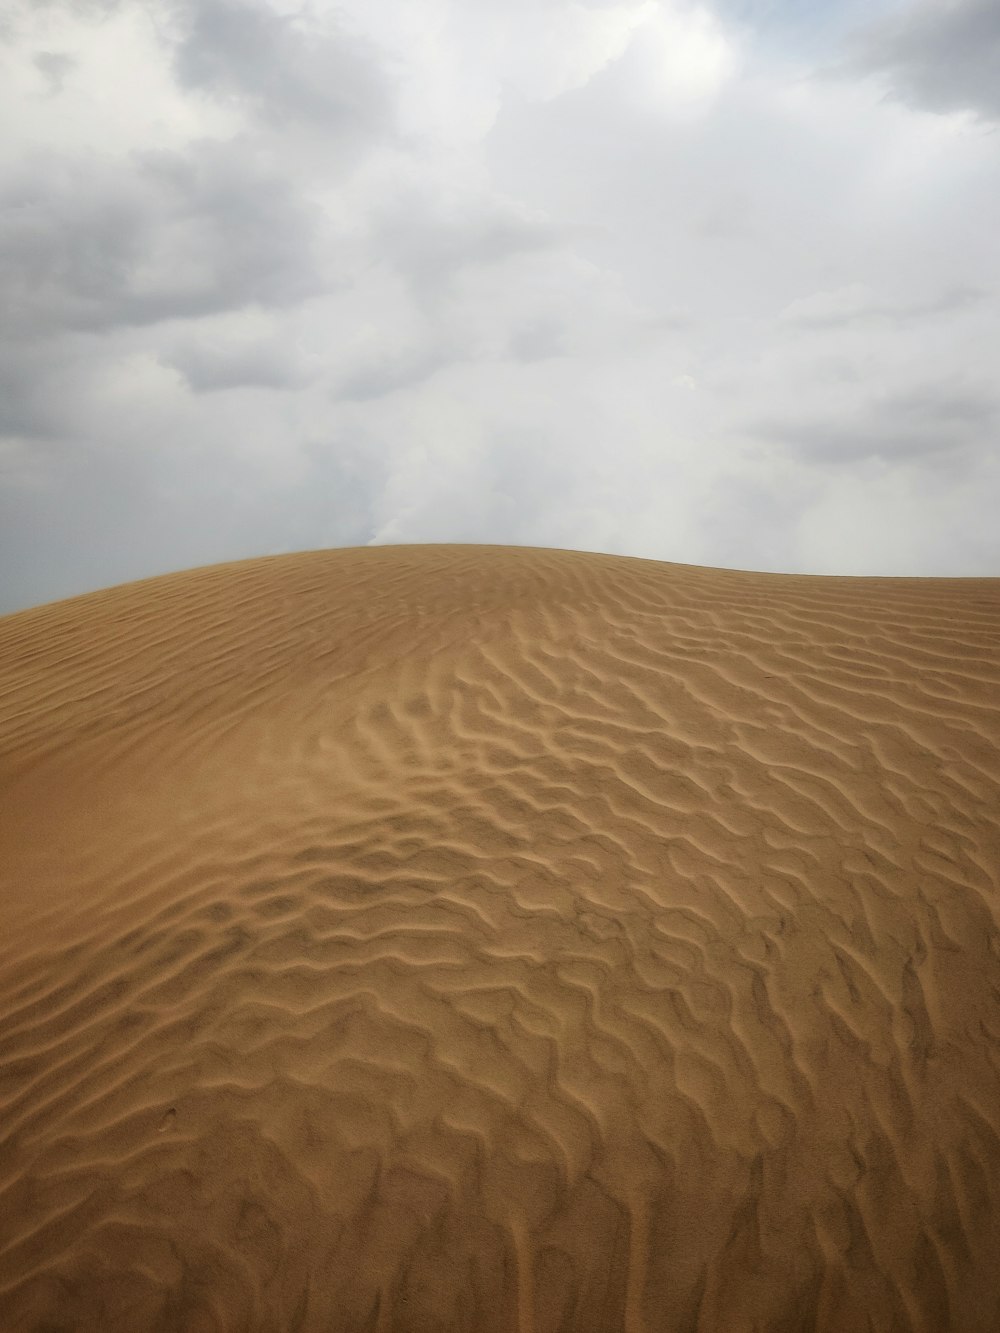 a large sand dune under a cloudy sky